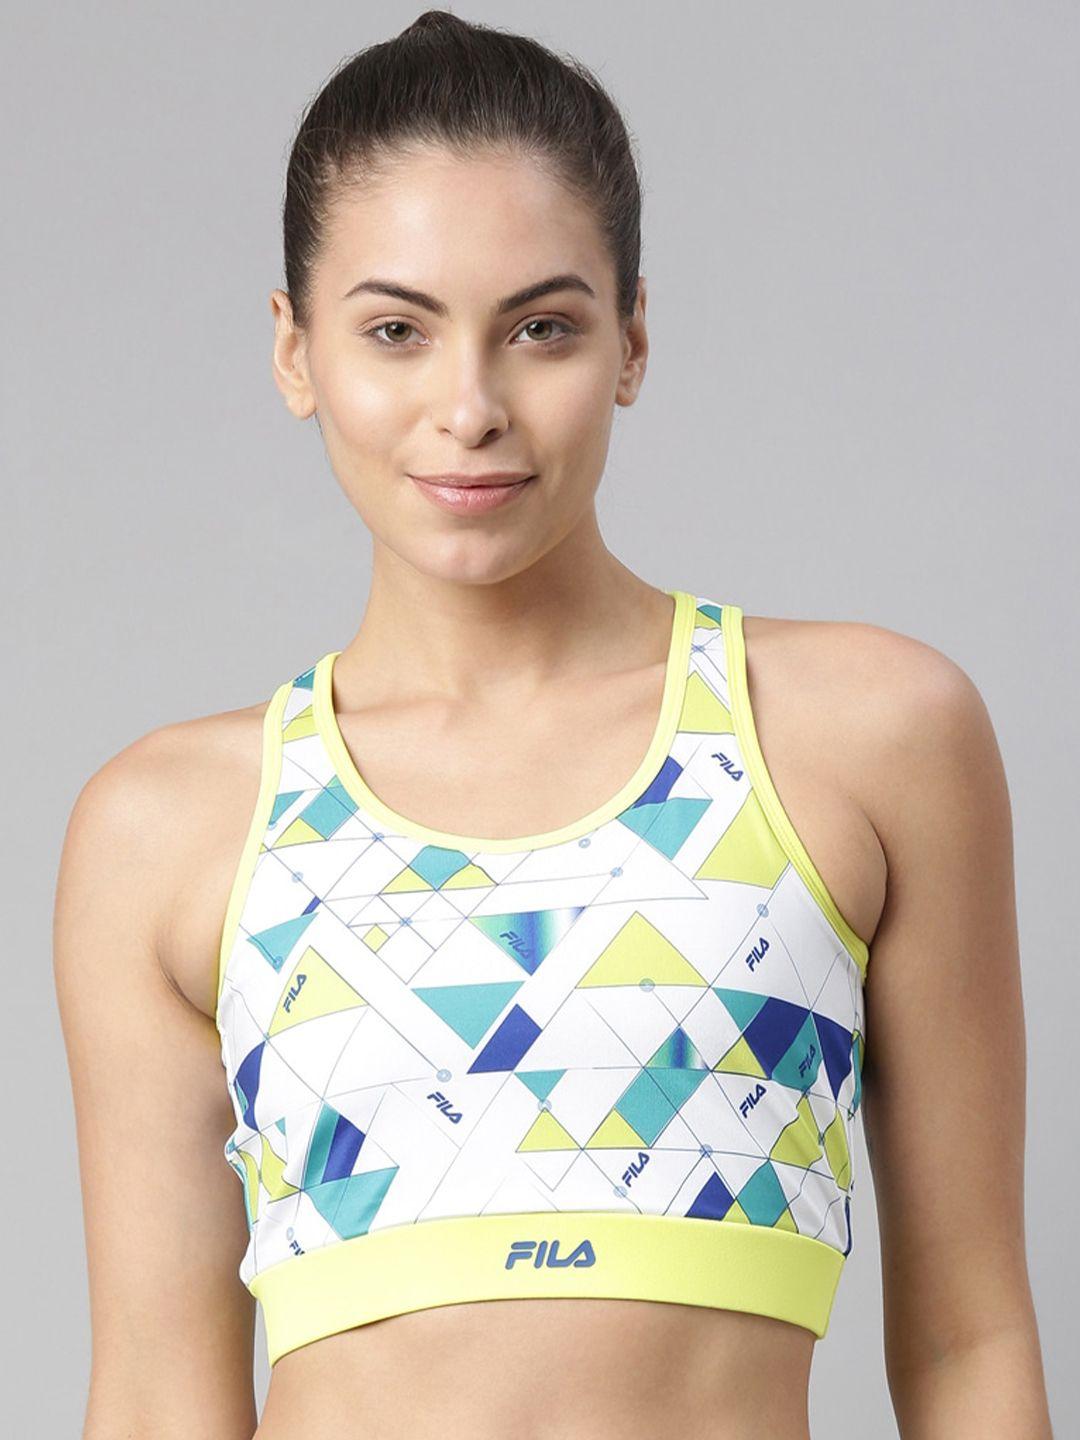 fila-yellow-&-blue-geometric-printed-non-wired-non-padded-workout-bra